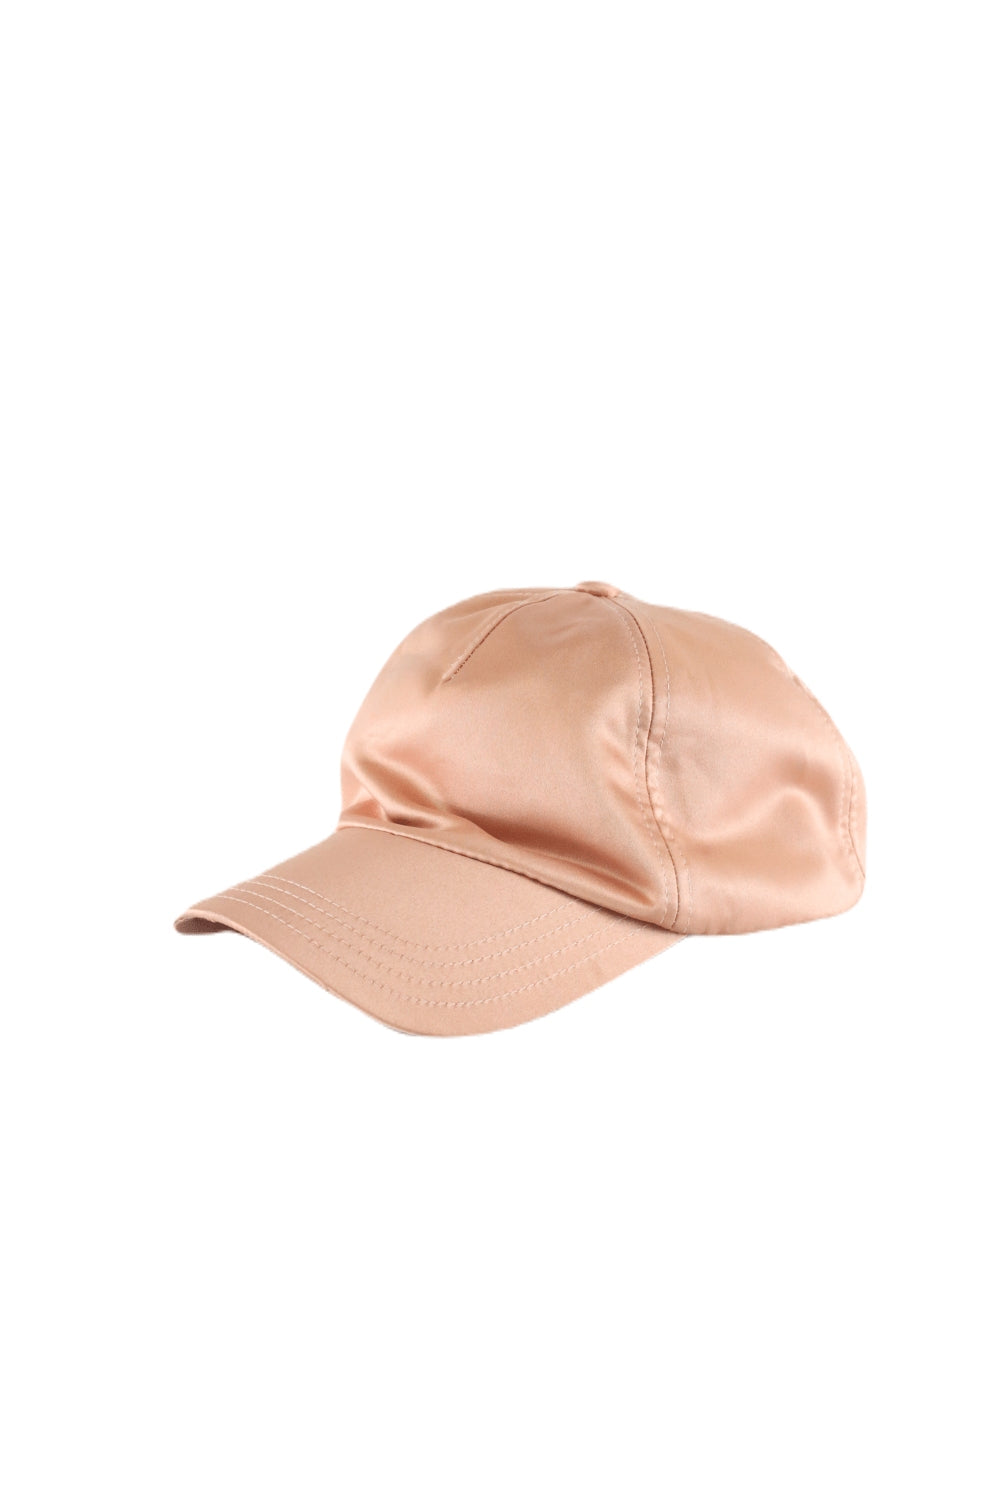 Country Road Pink Hat